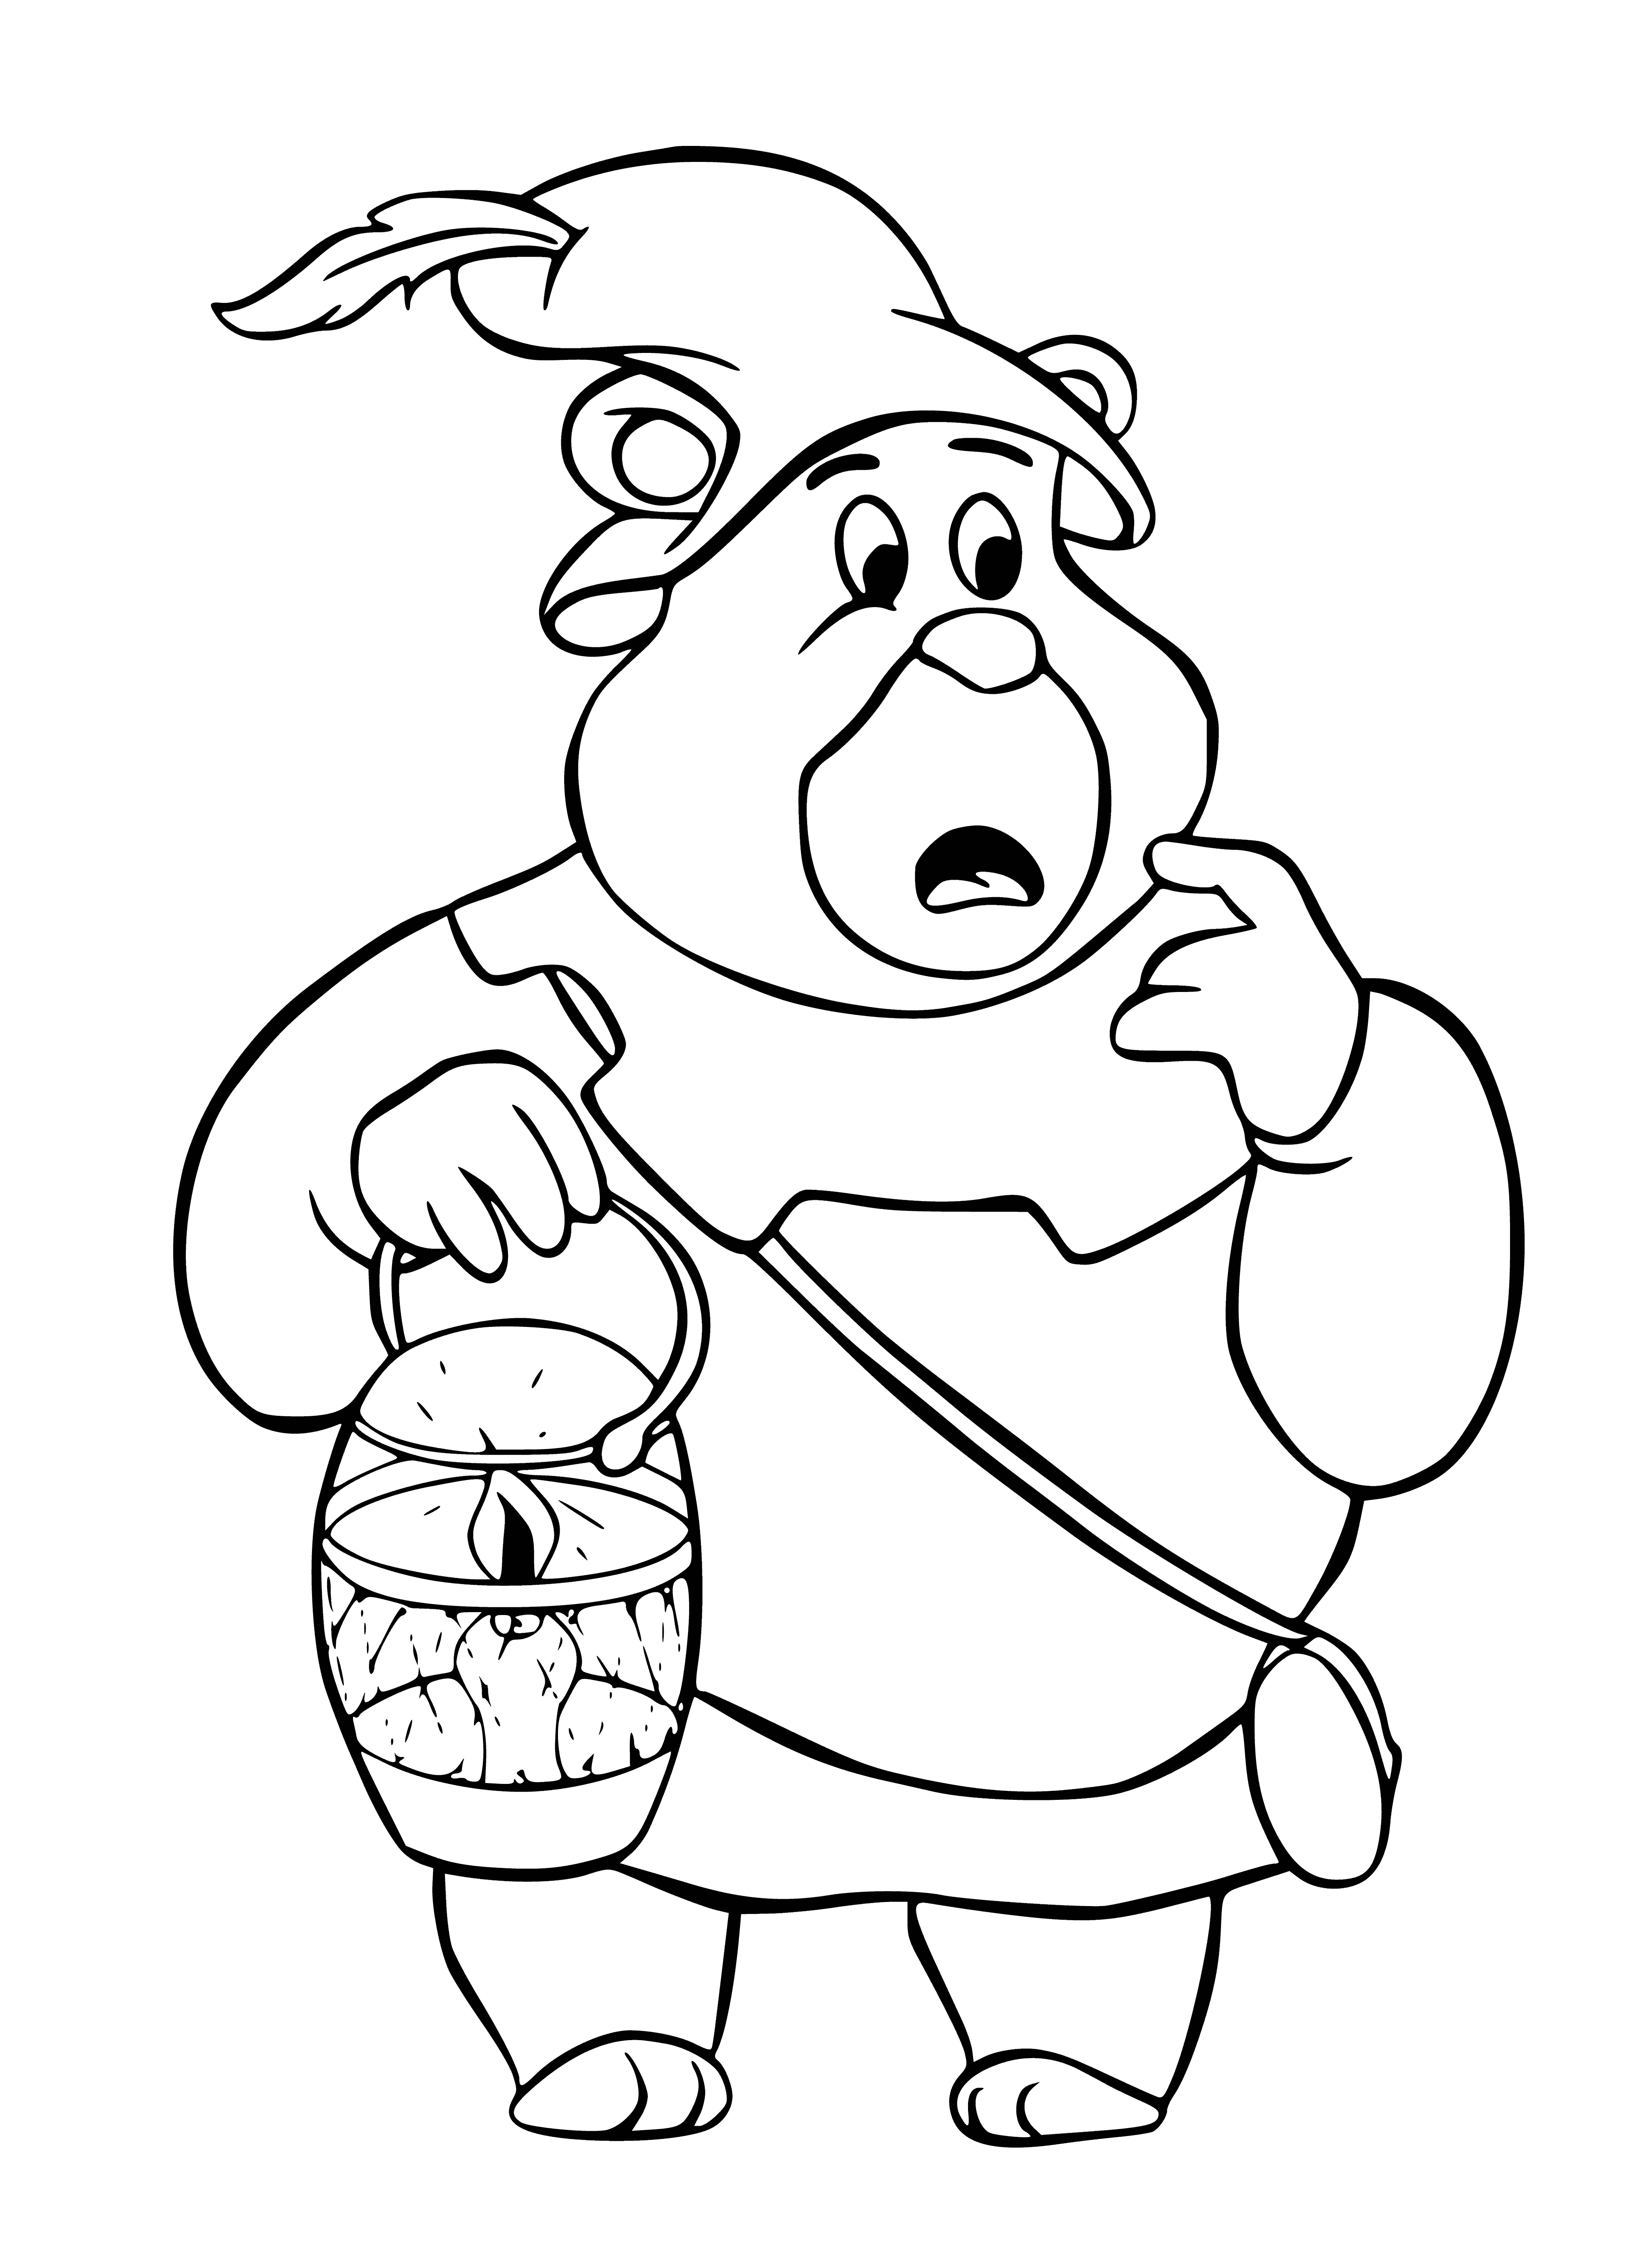 coloring page: An obese Gummi Bear has an oversized belly that hangs past his knees and disproportionally thin arms and legs. He is unable to move and is having difficulty breathing.